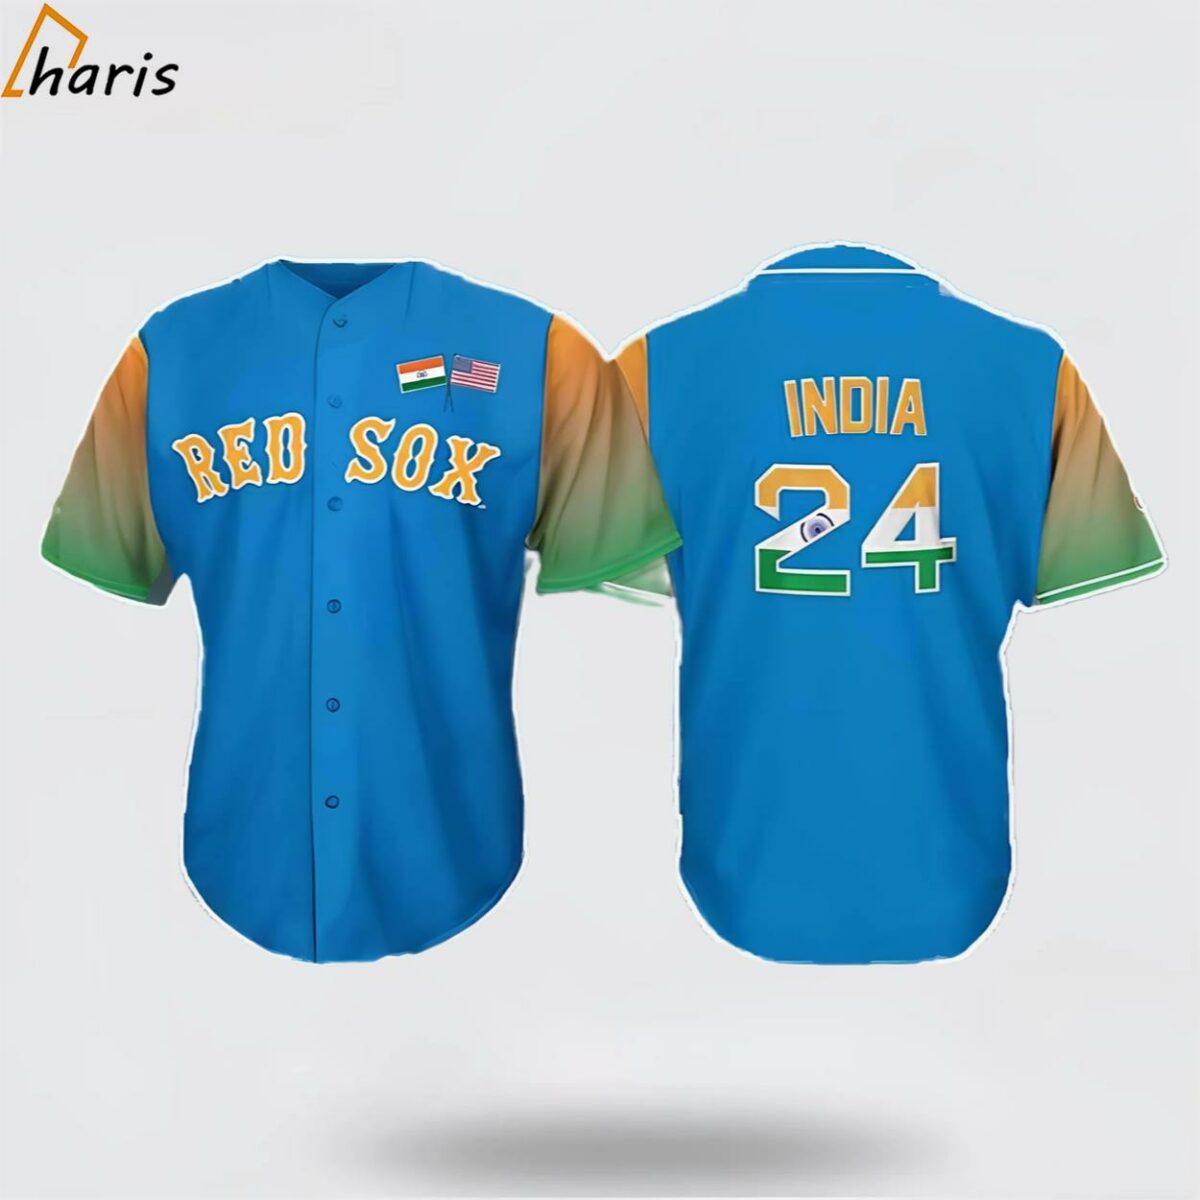 Red Sox India Celebration Jersey 2024 Giveaway 1 1